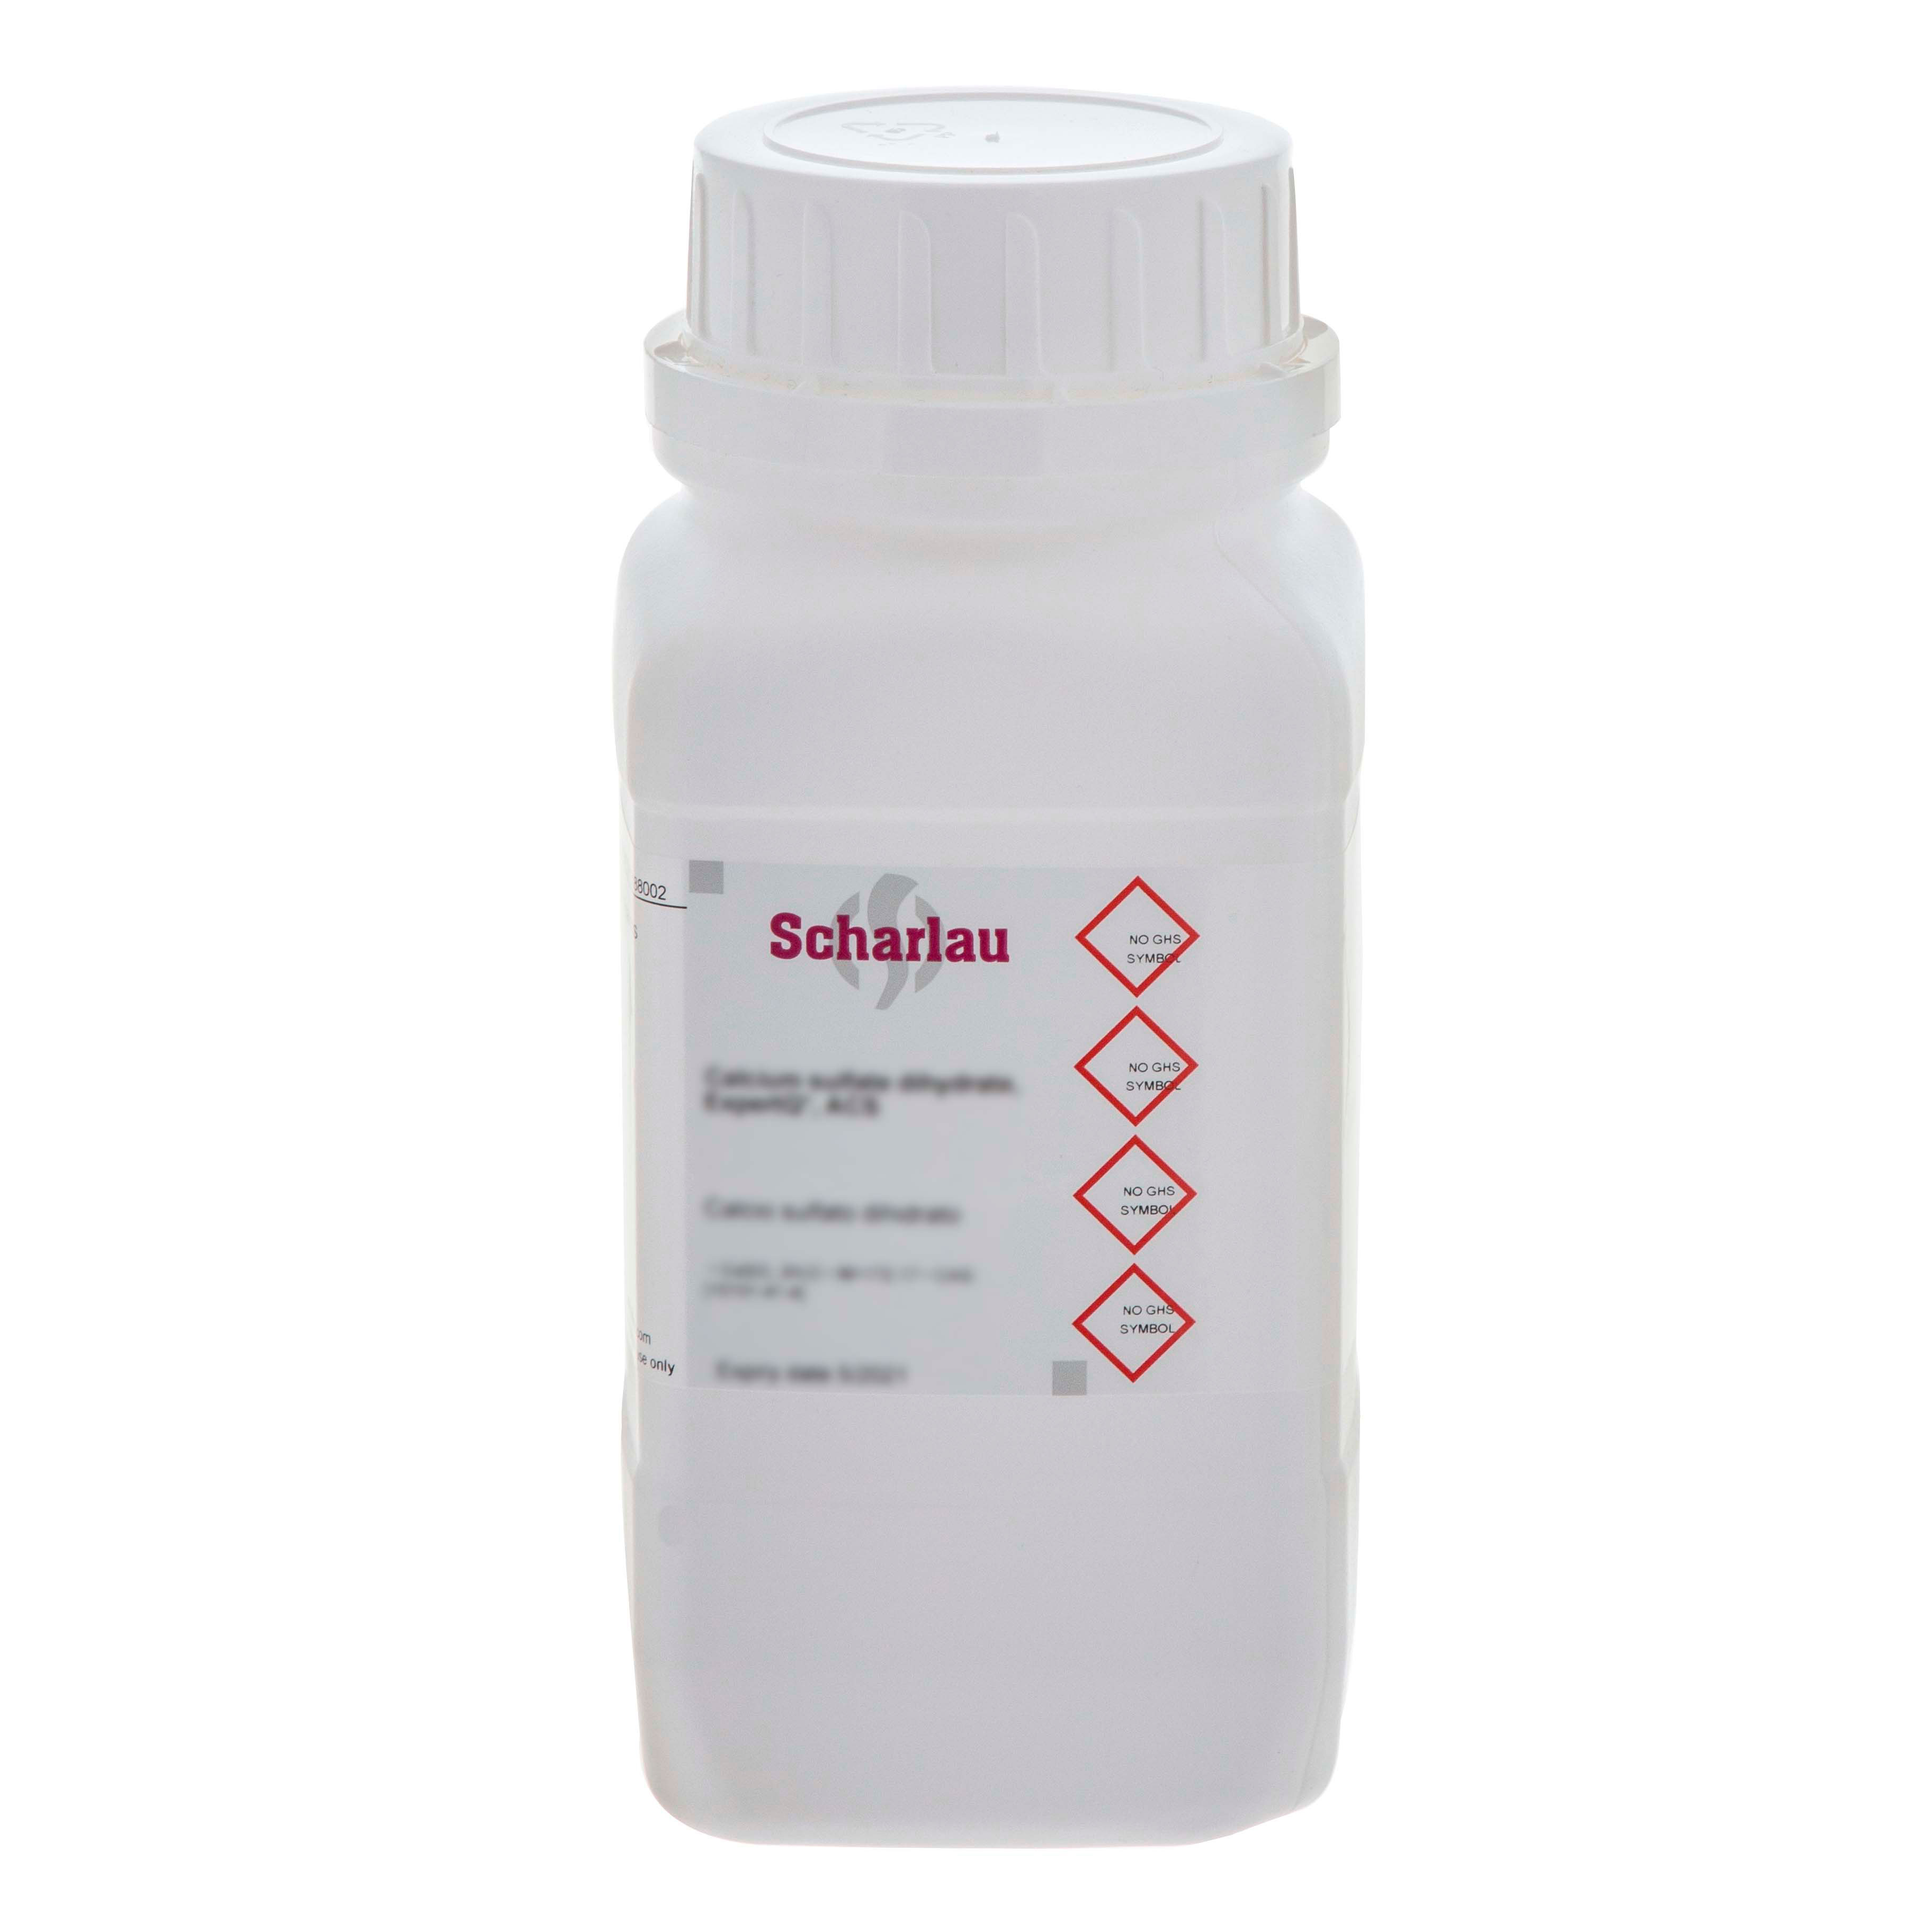 di-Potassium hydrogen phosphate trihydrate, for analysis, ExpertQ®, Reag. Ph Eur